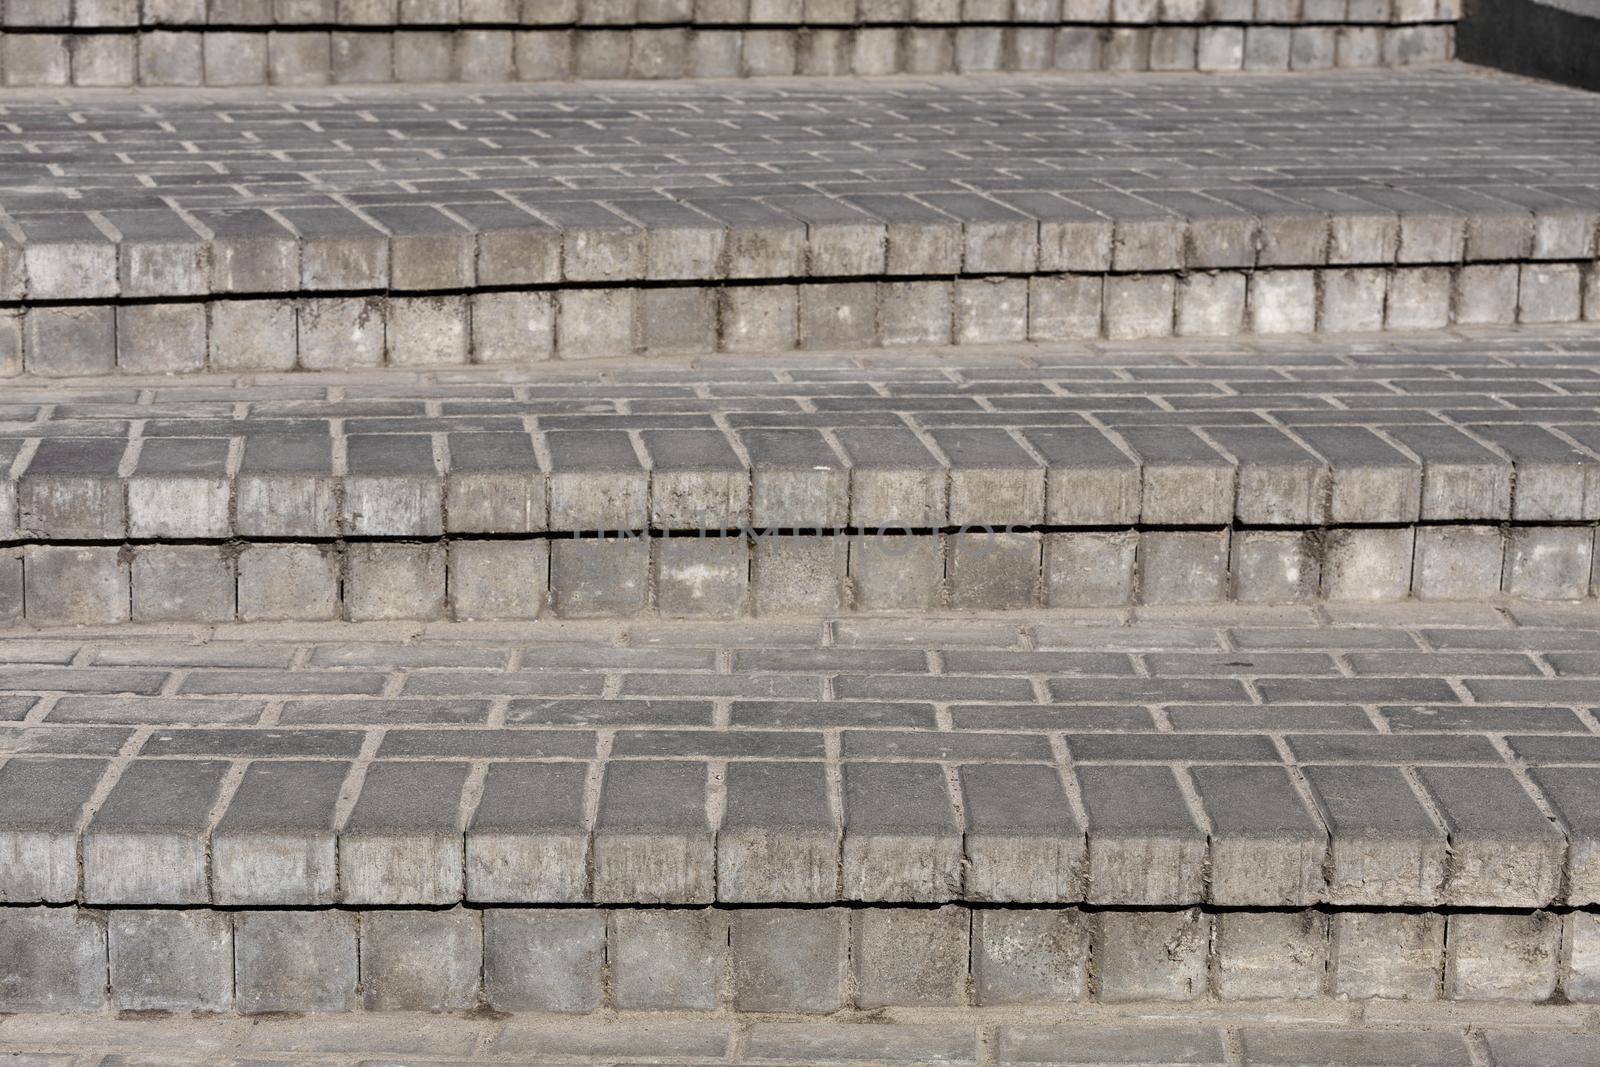 Rows of gray steps of gray paving slabs laid out evenly, consistently and tightly to each other.